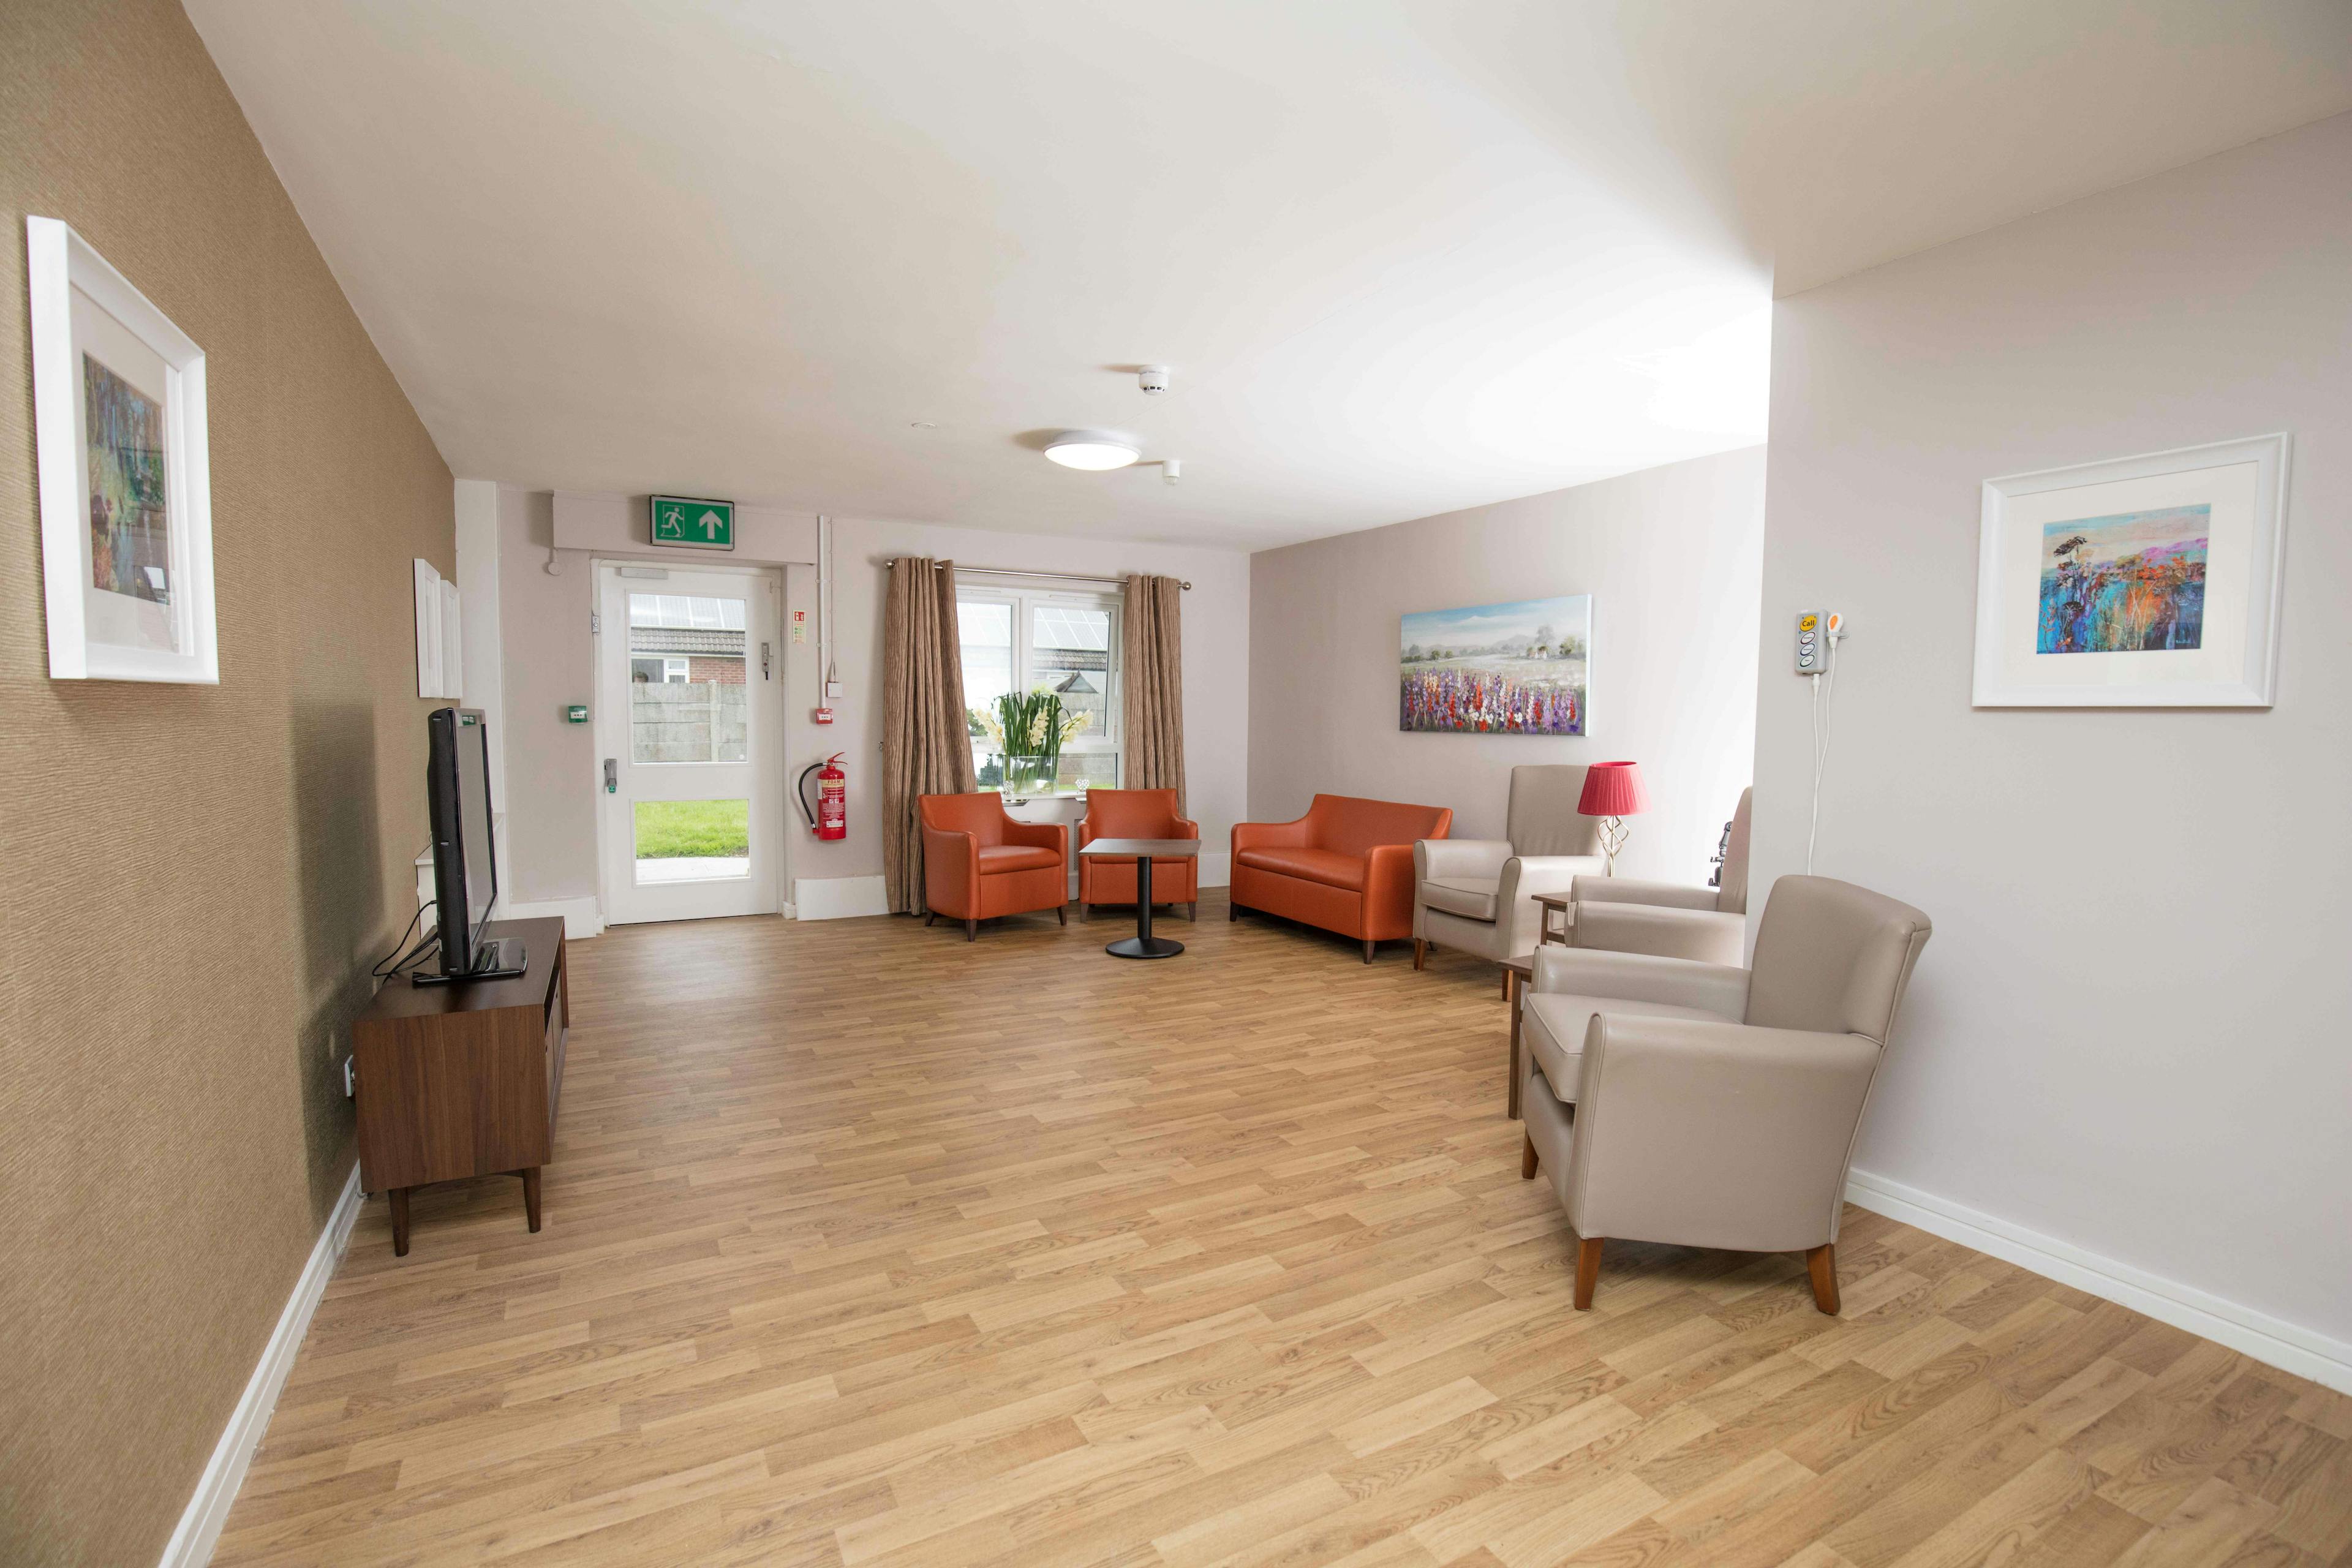 Minster Care Group - Garswood House care home 5